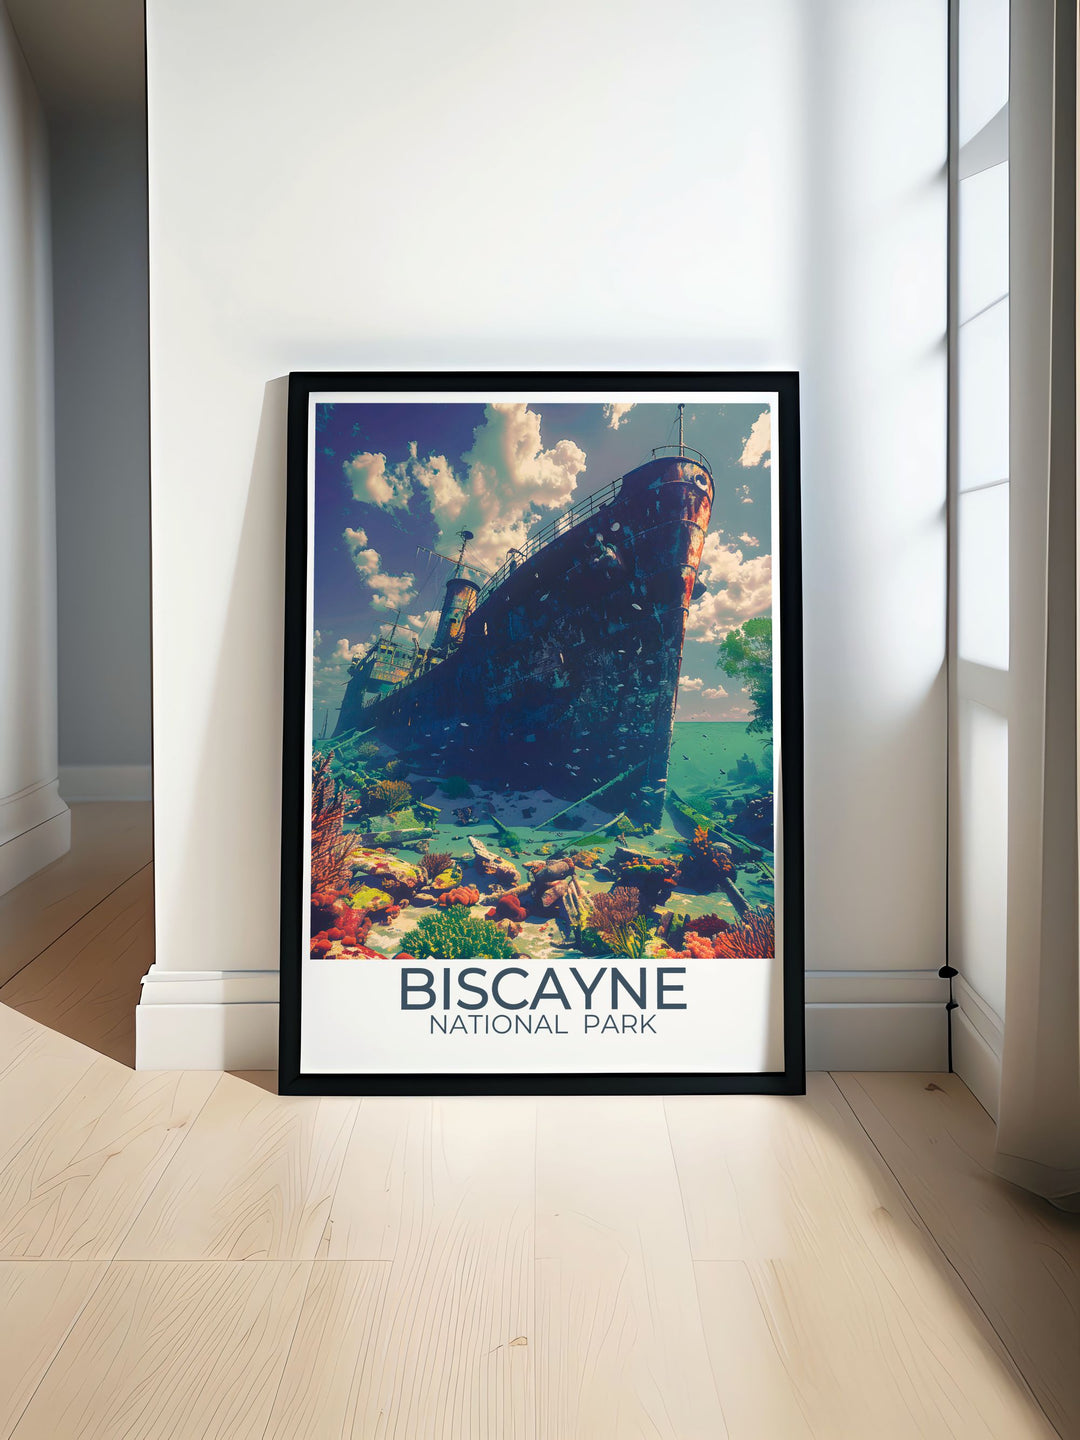 Stunning Biscayne National Park print highlighting the lush landscapes of The Maritime Heritage Trail and the colorful coral reefs, ideal for nature enthusiasts and history buffs.